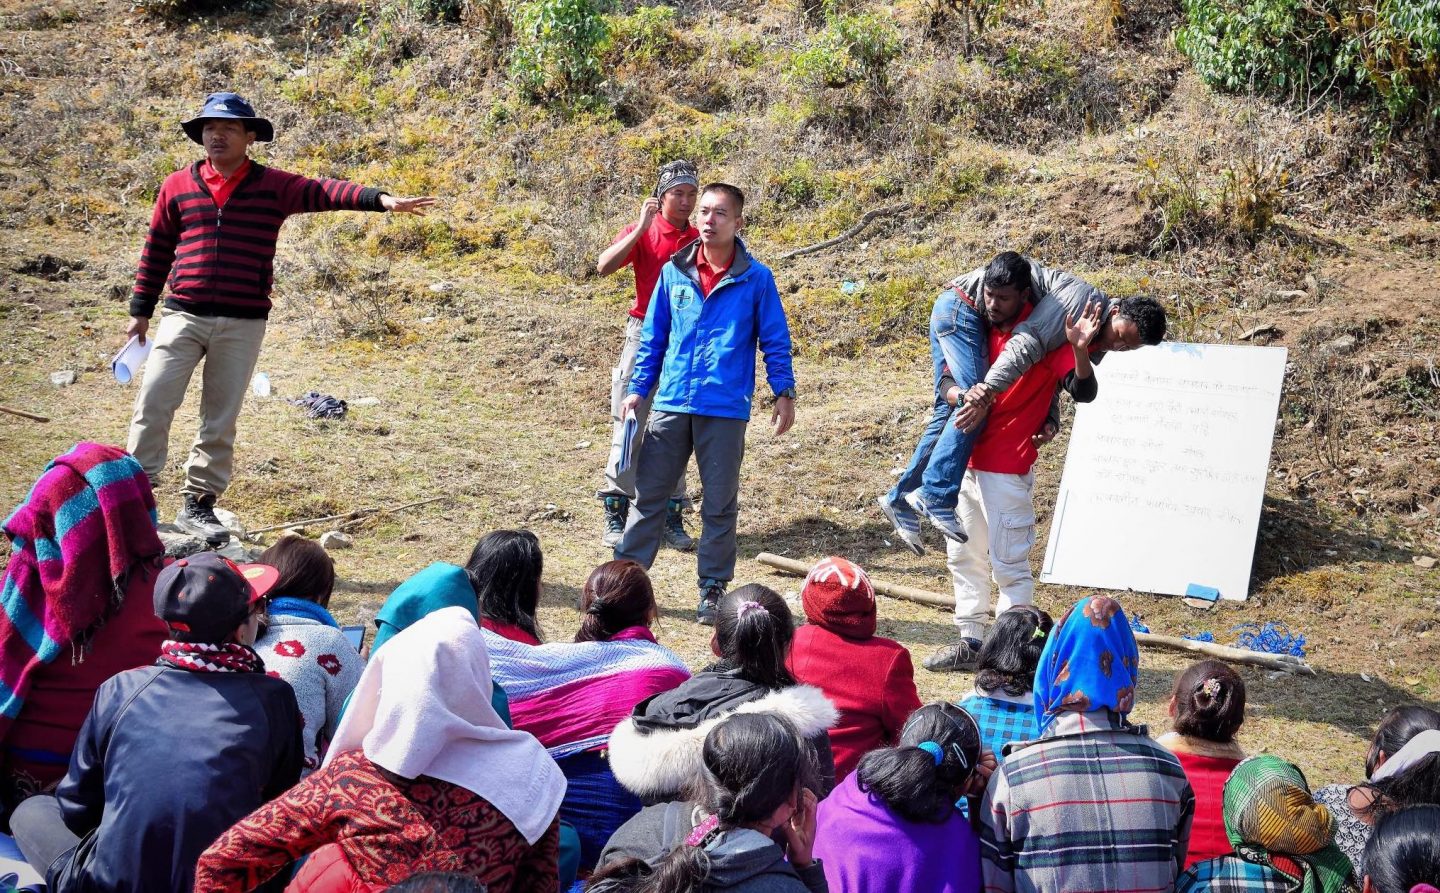 Conducting disaster-preparedness training for villagers in the mountains in Nepal. (Photo courtesy of James Tan)